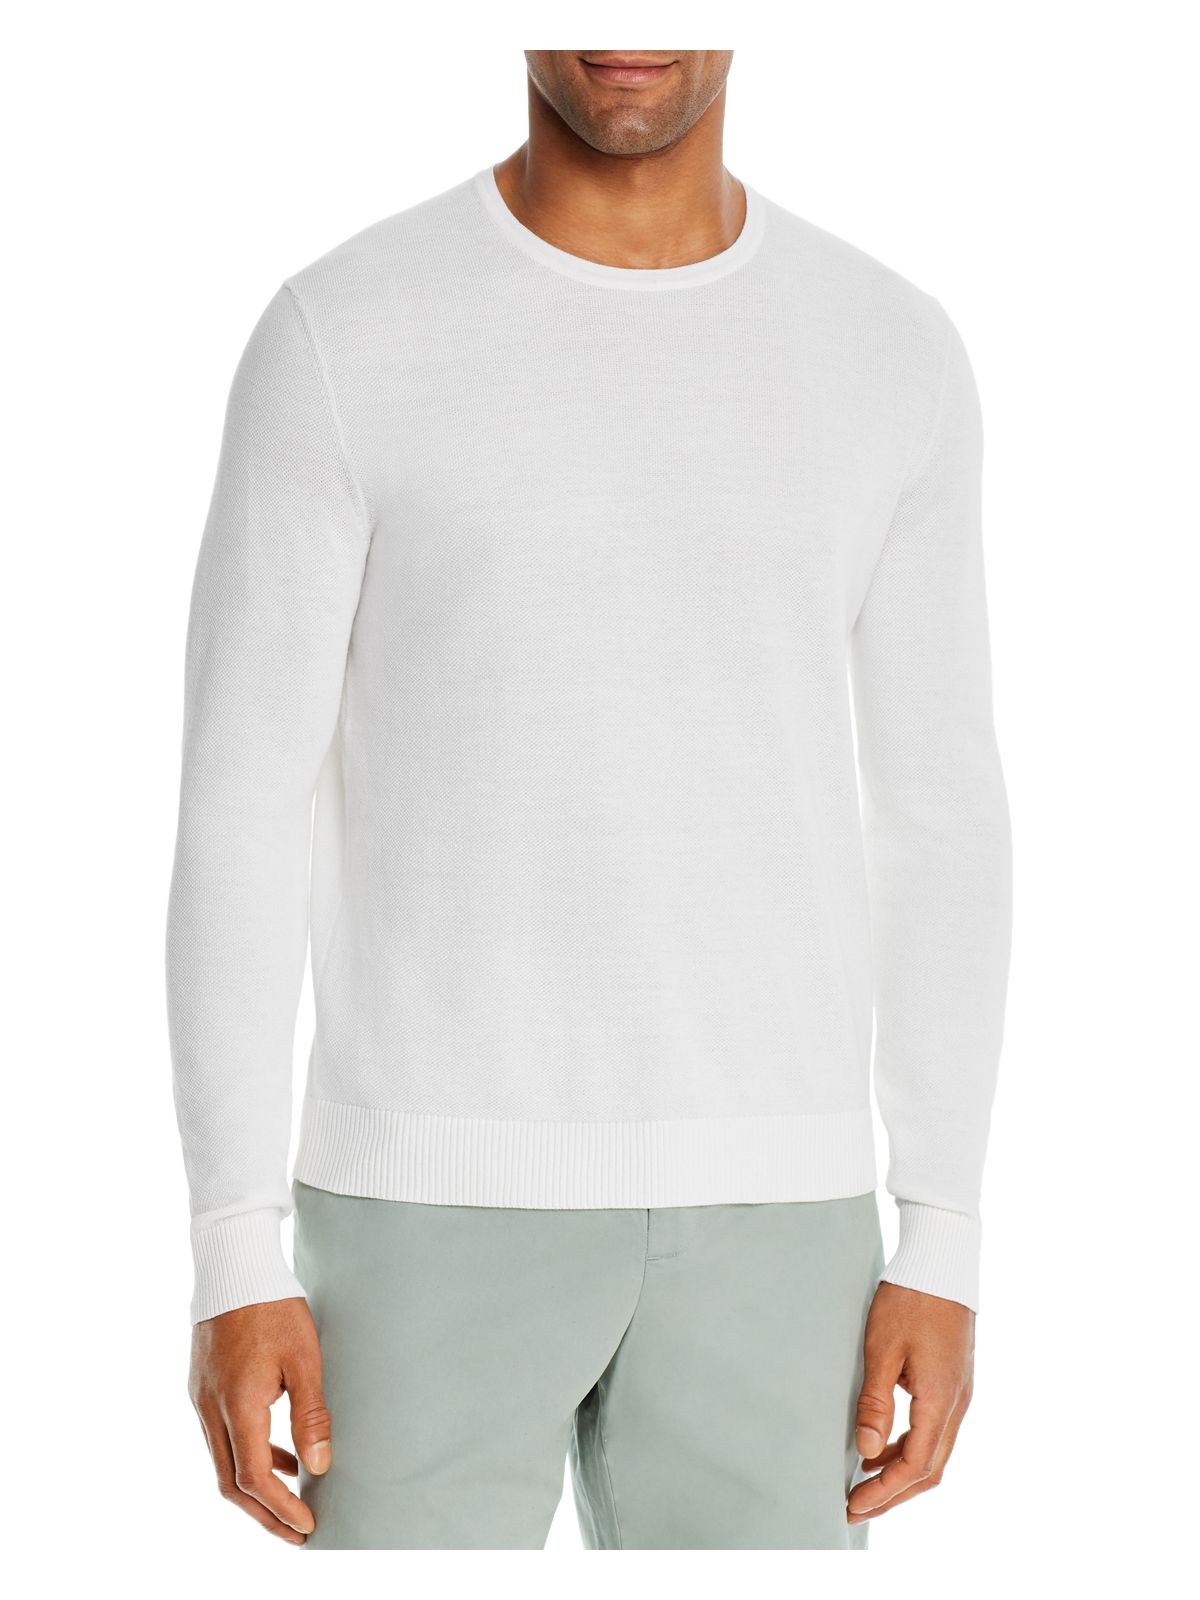 DYLAN GRAY Mens Ivory Long Sleeve Crew Neck Classic Fit Sweater S